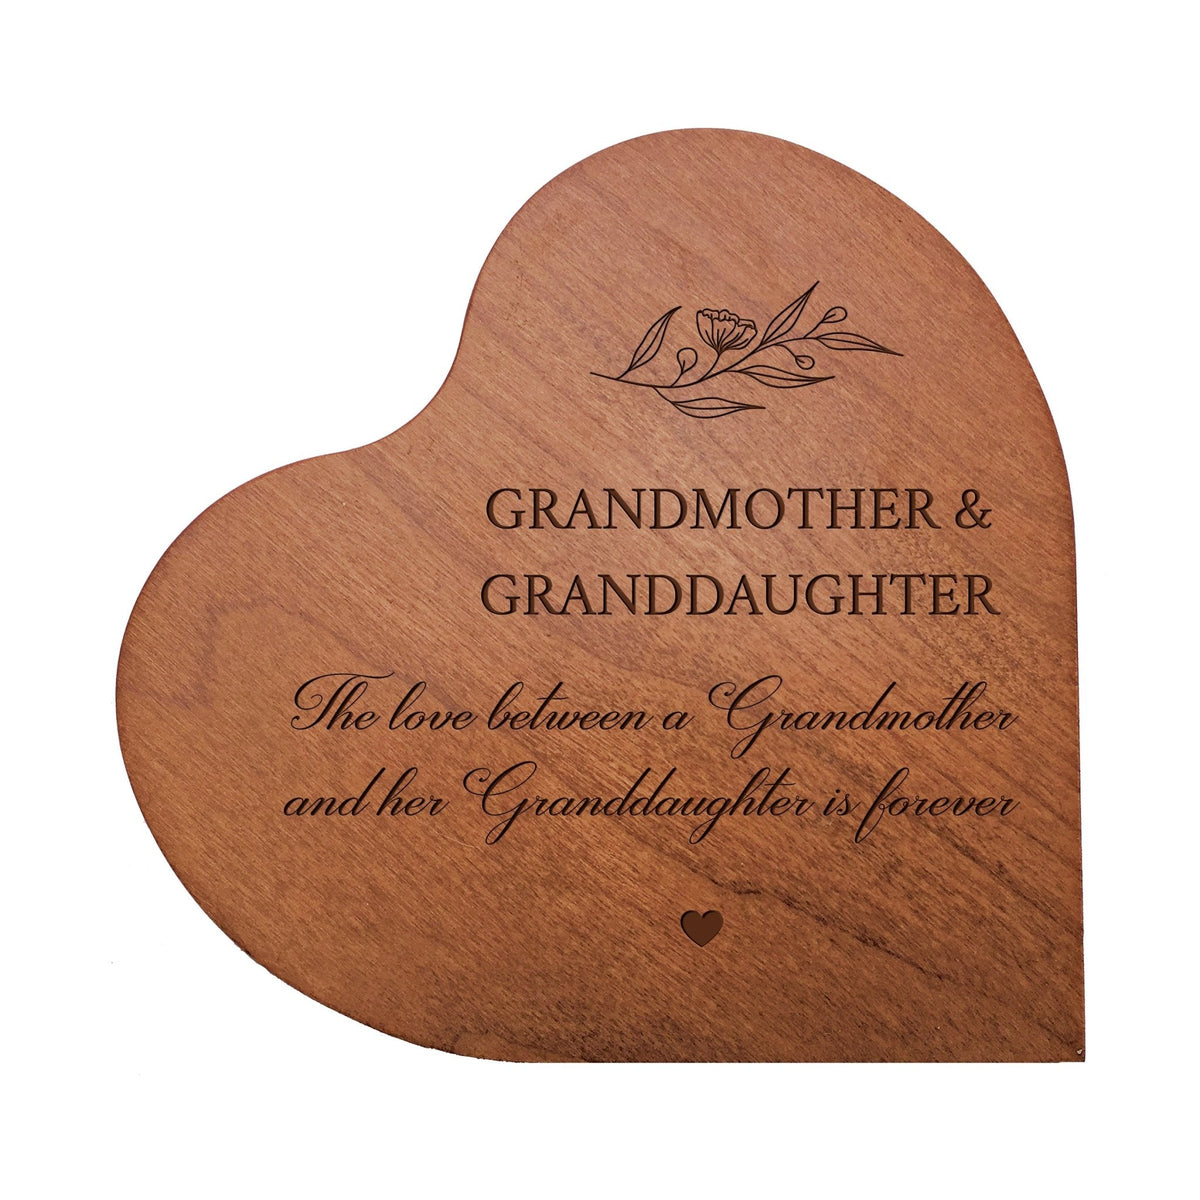 Modern Grandmother’s Love Solid Wood Heart Decoration With Inspirational Verse Keepsake Gift 5x5.25 - Grandmother &amp; Granddaughter - LifeSong Milestones